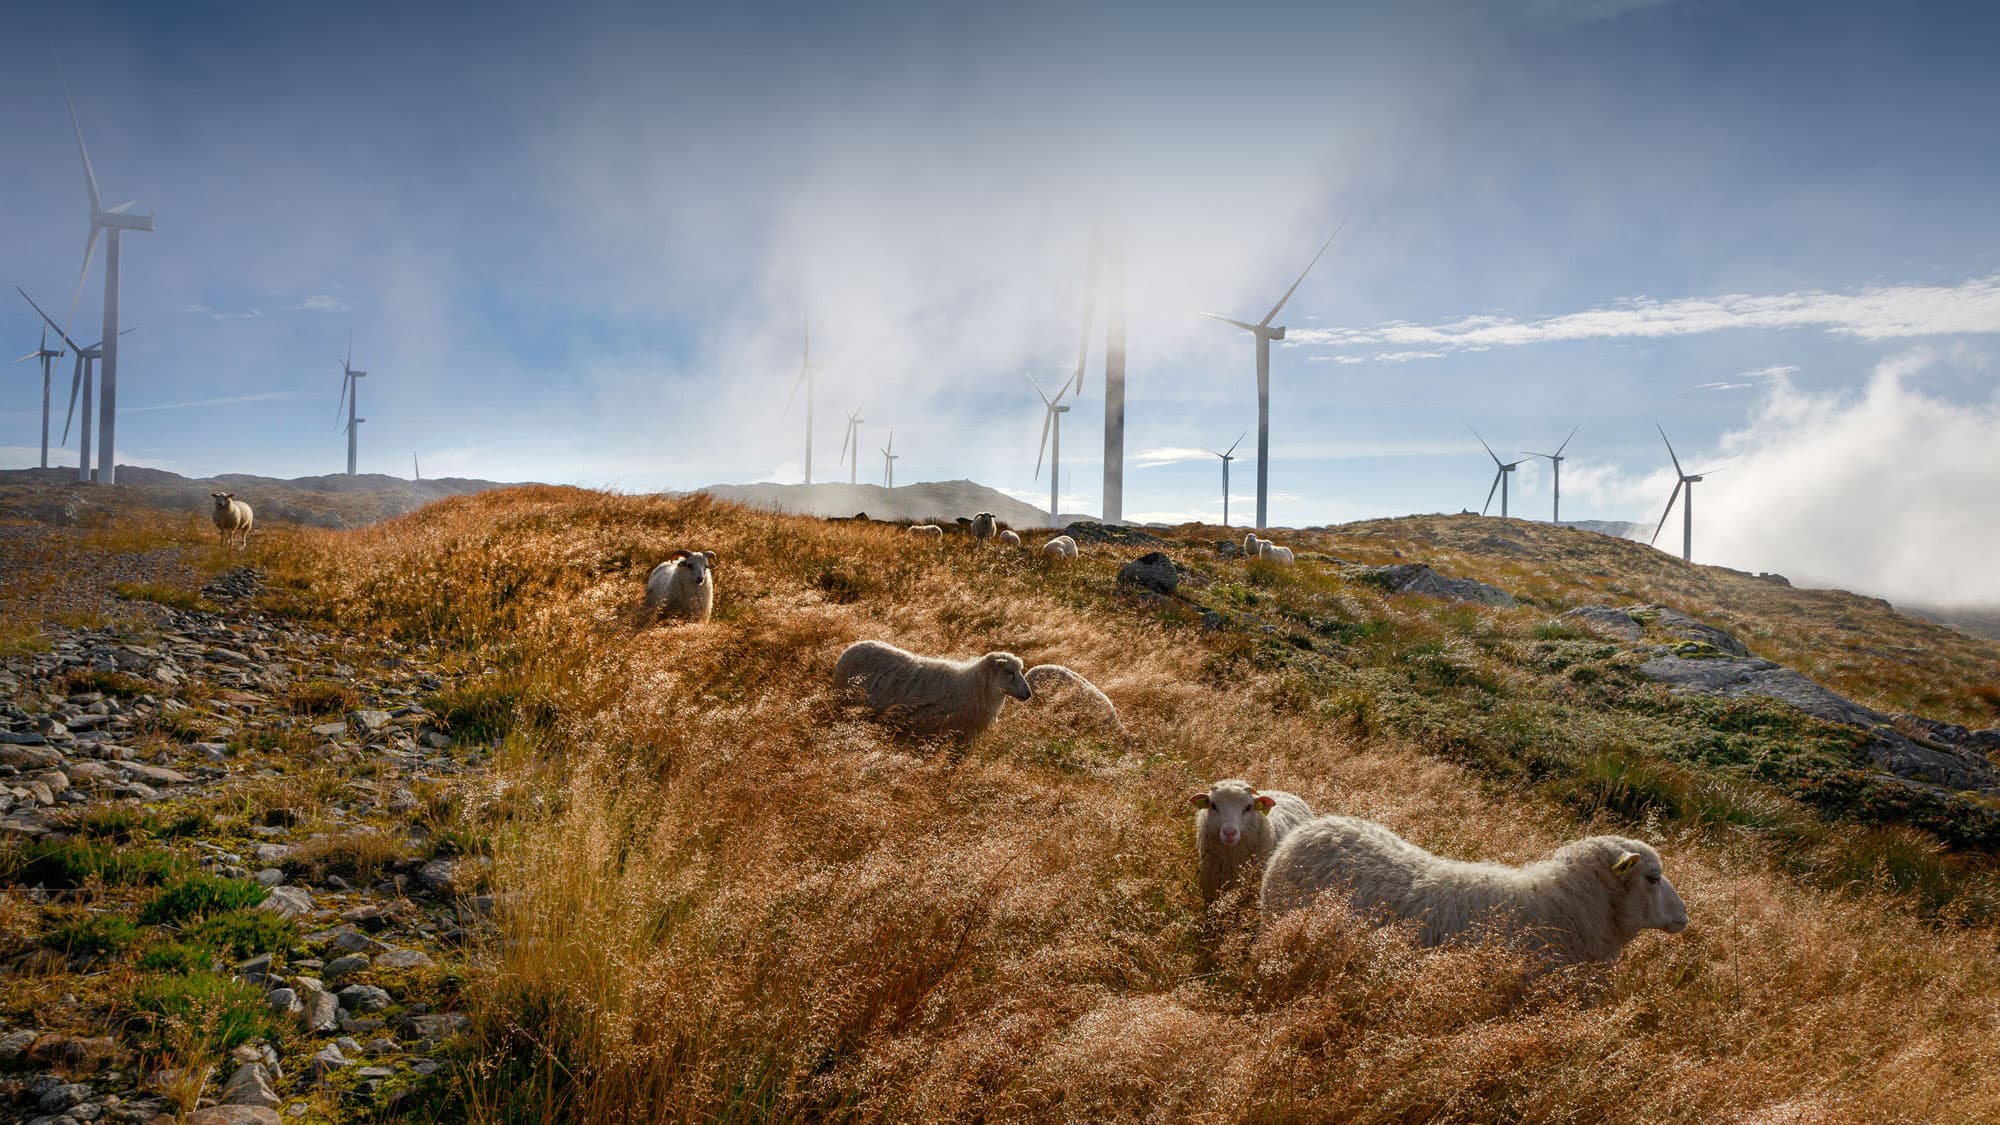 Windmills with sheeps on grassy hills and sunny sky.